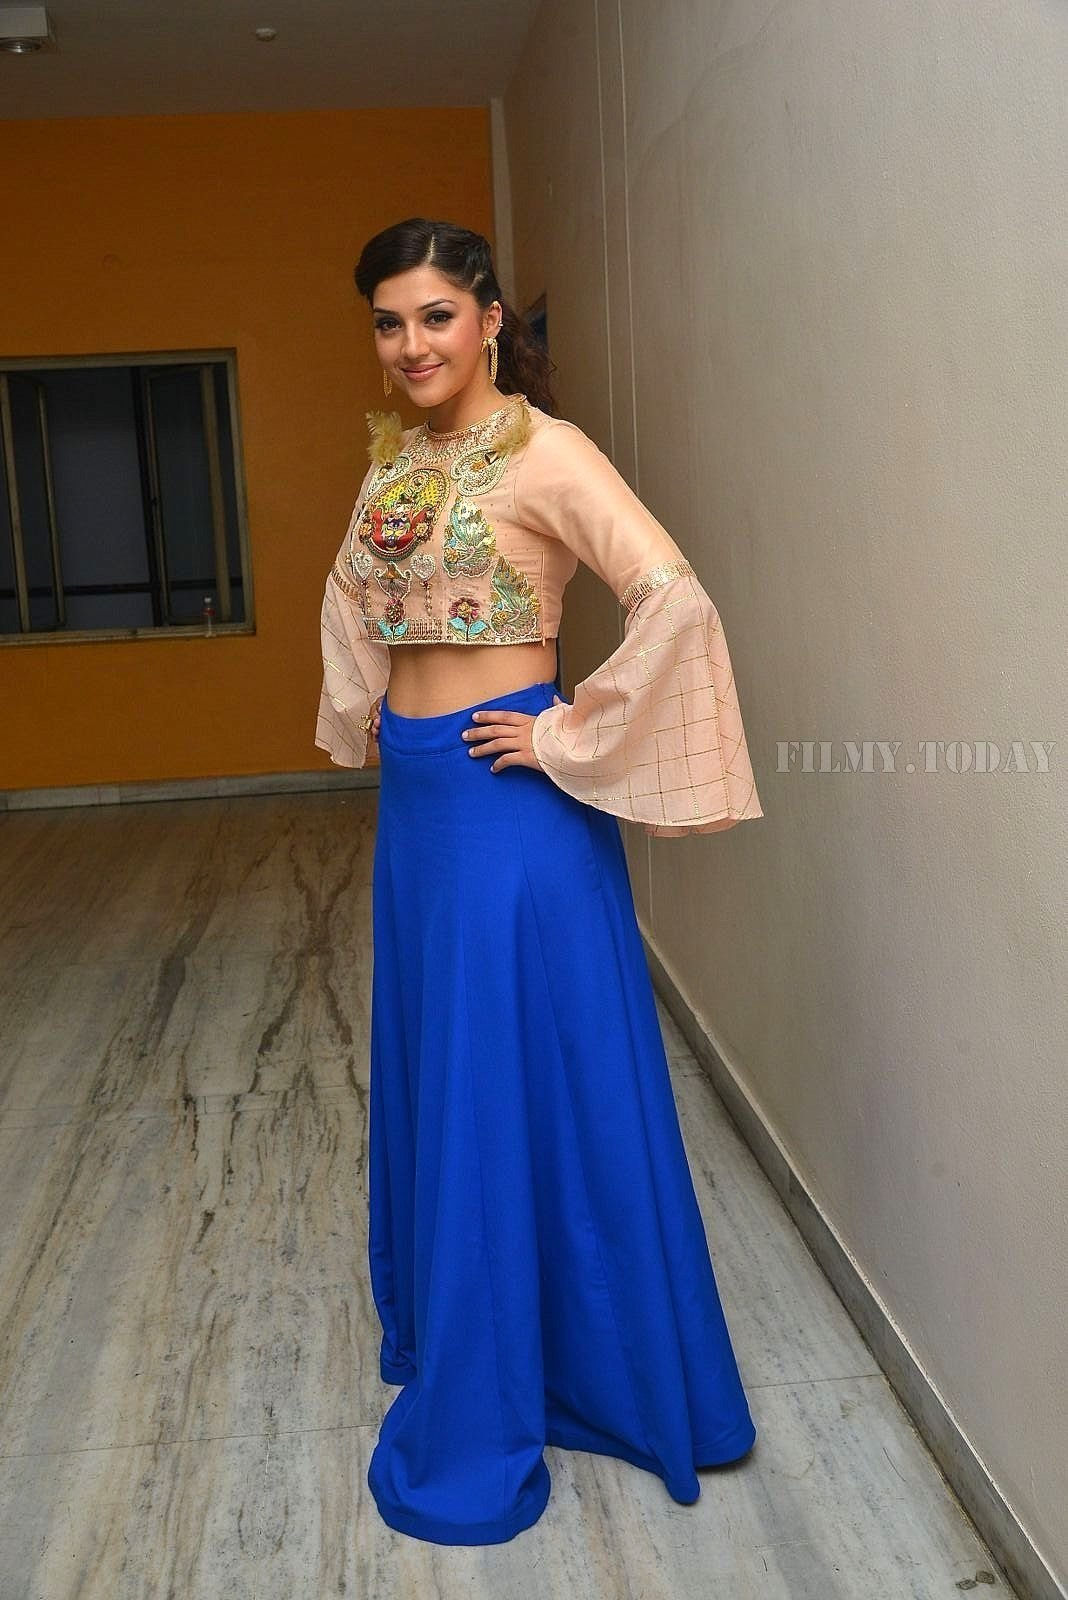 Mehreen Kaur - Raja The Great Movie Theatrical Trailer Launch Photos | Picture 1533960